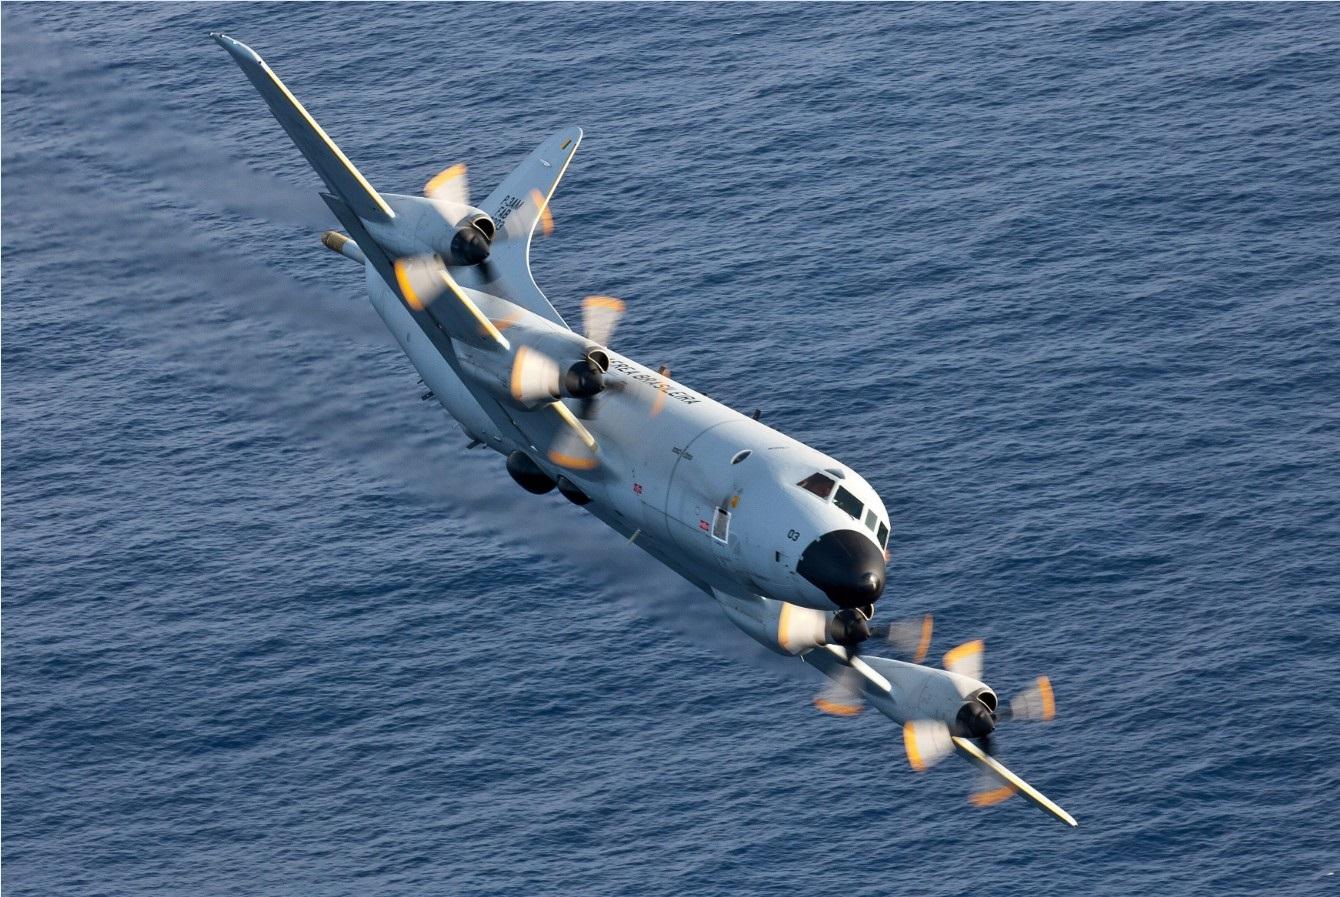 Akaer Awarded Brazilian Air Force Contract to Revitalize Wing of P-3 Orion Maritime Patrol Aircraft